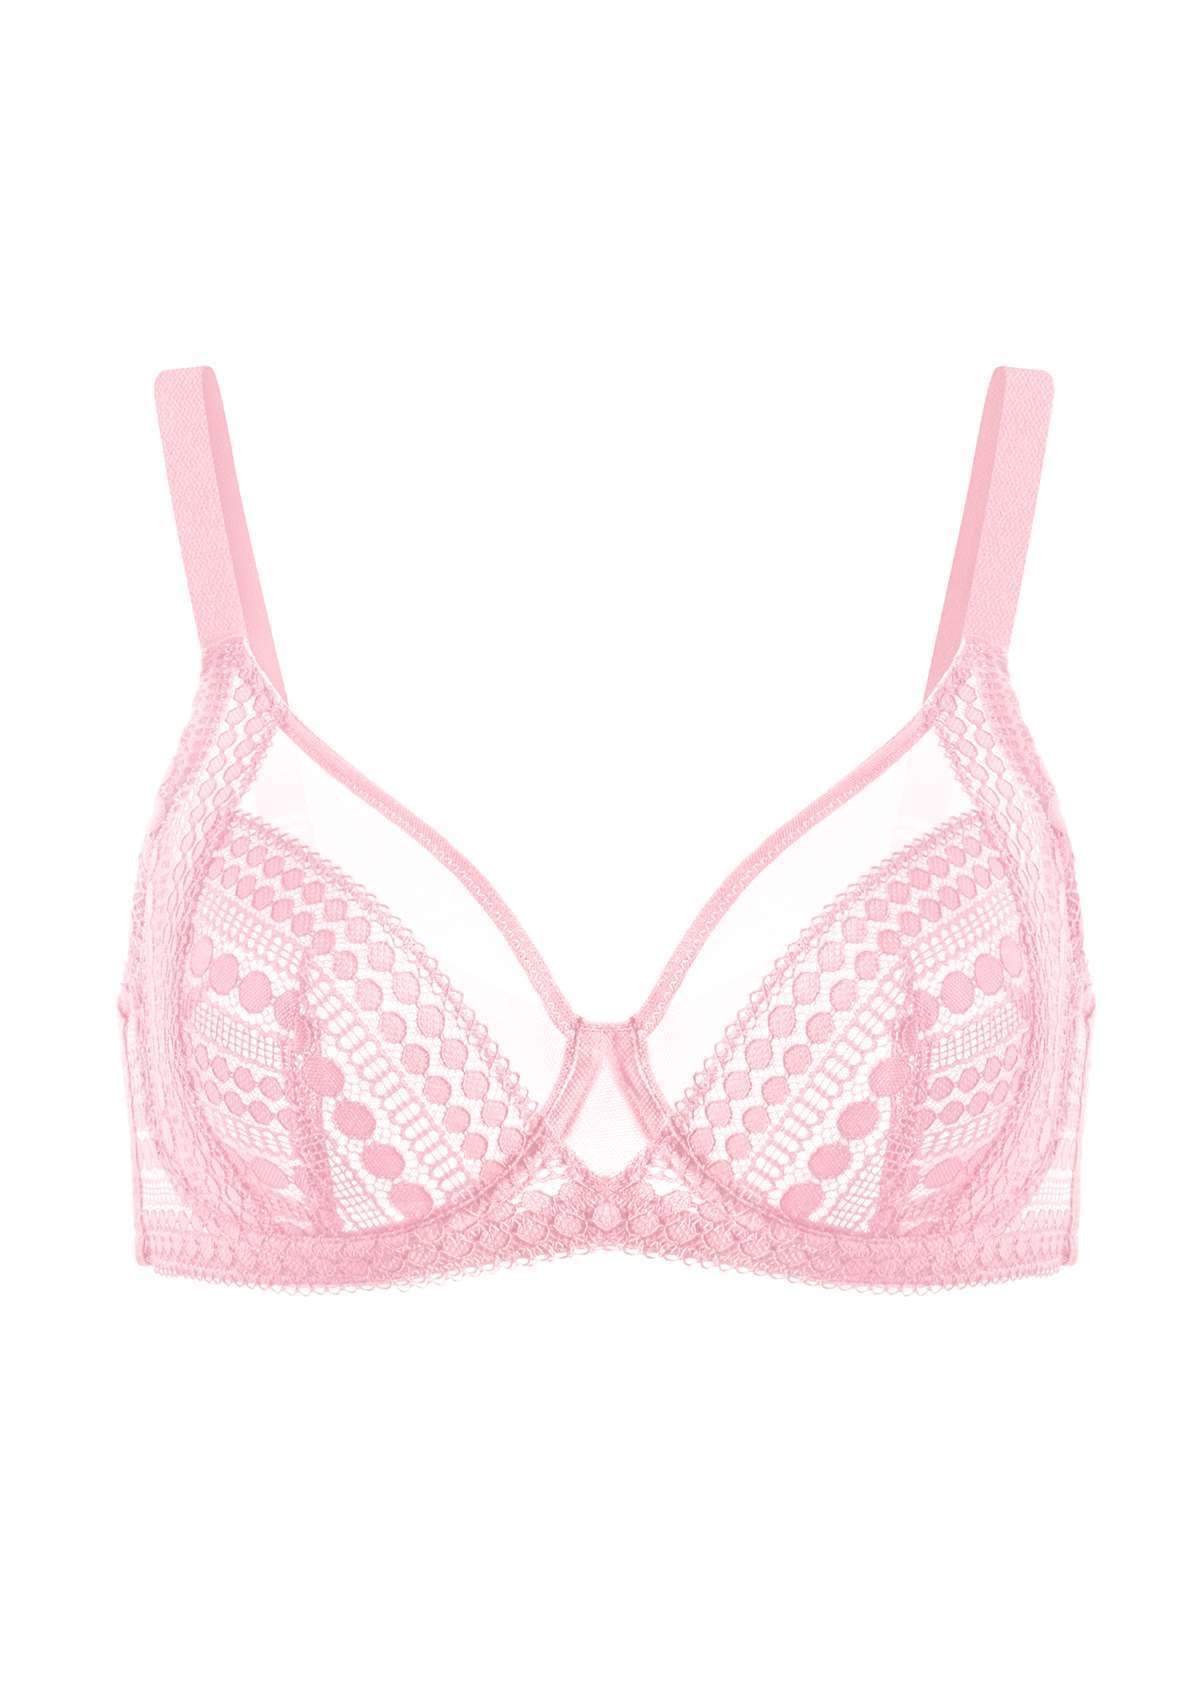 HSIA Heroine Lace Bra And Panties Set: Most Comfortable Supportive Bra - Pink / 38 / DDD/F